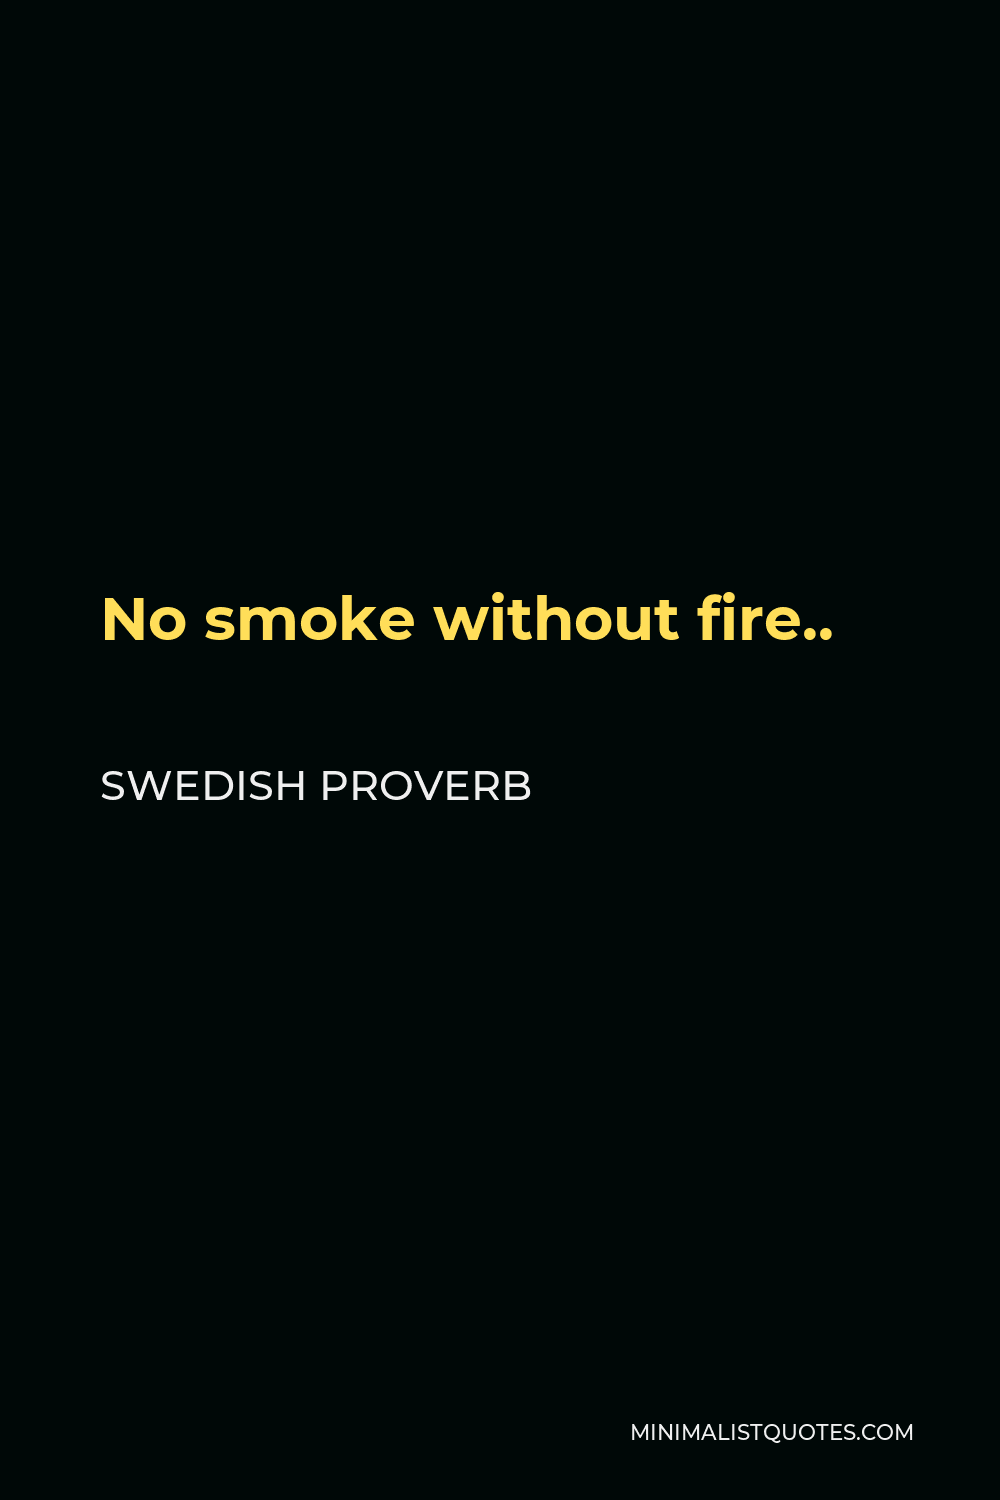 Swedish Proverb Quote - No smoke without fire..